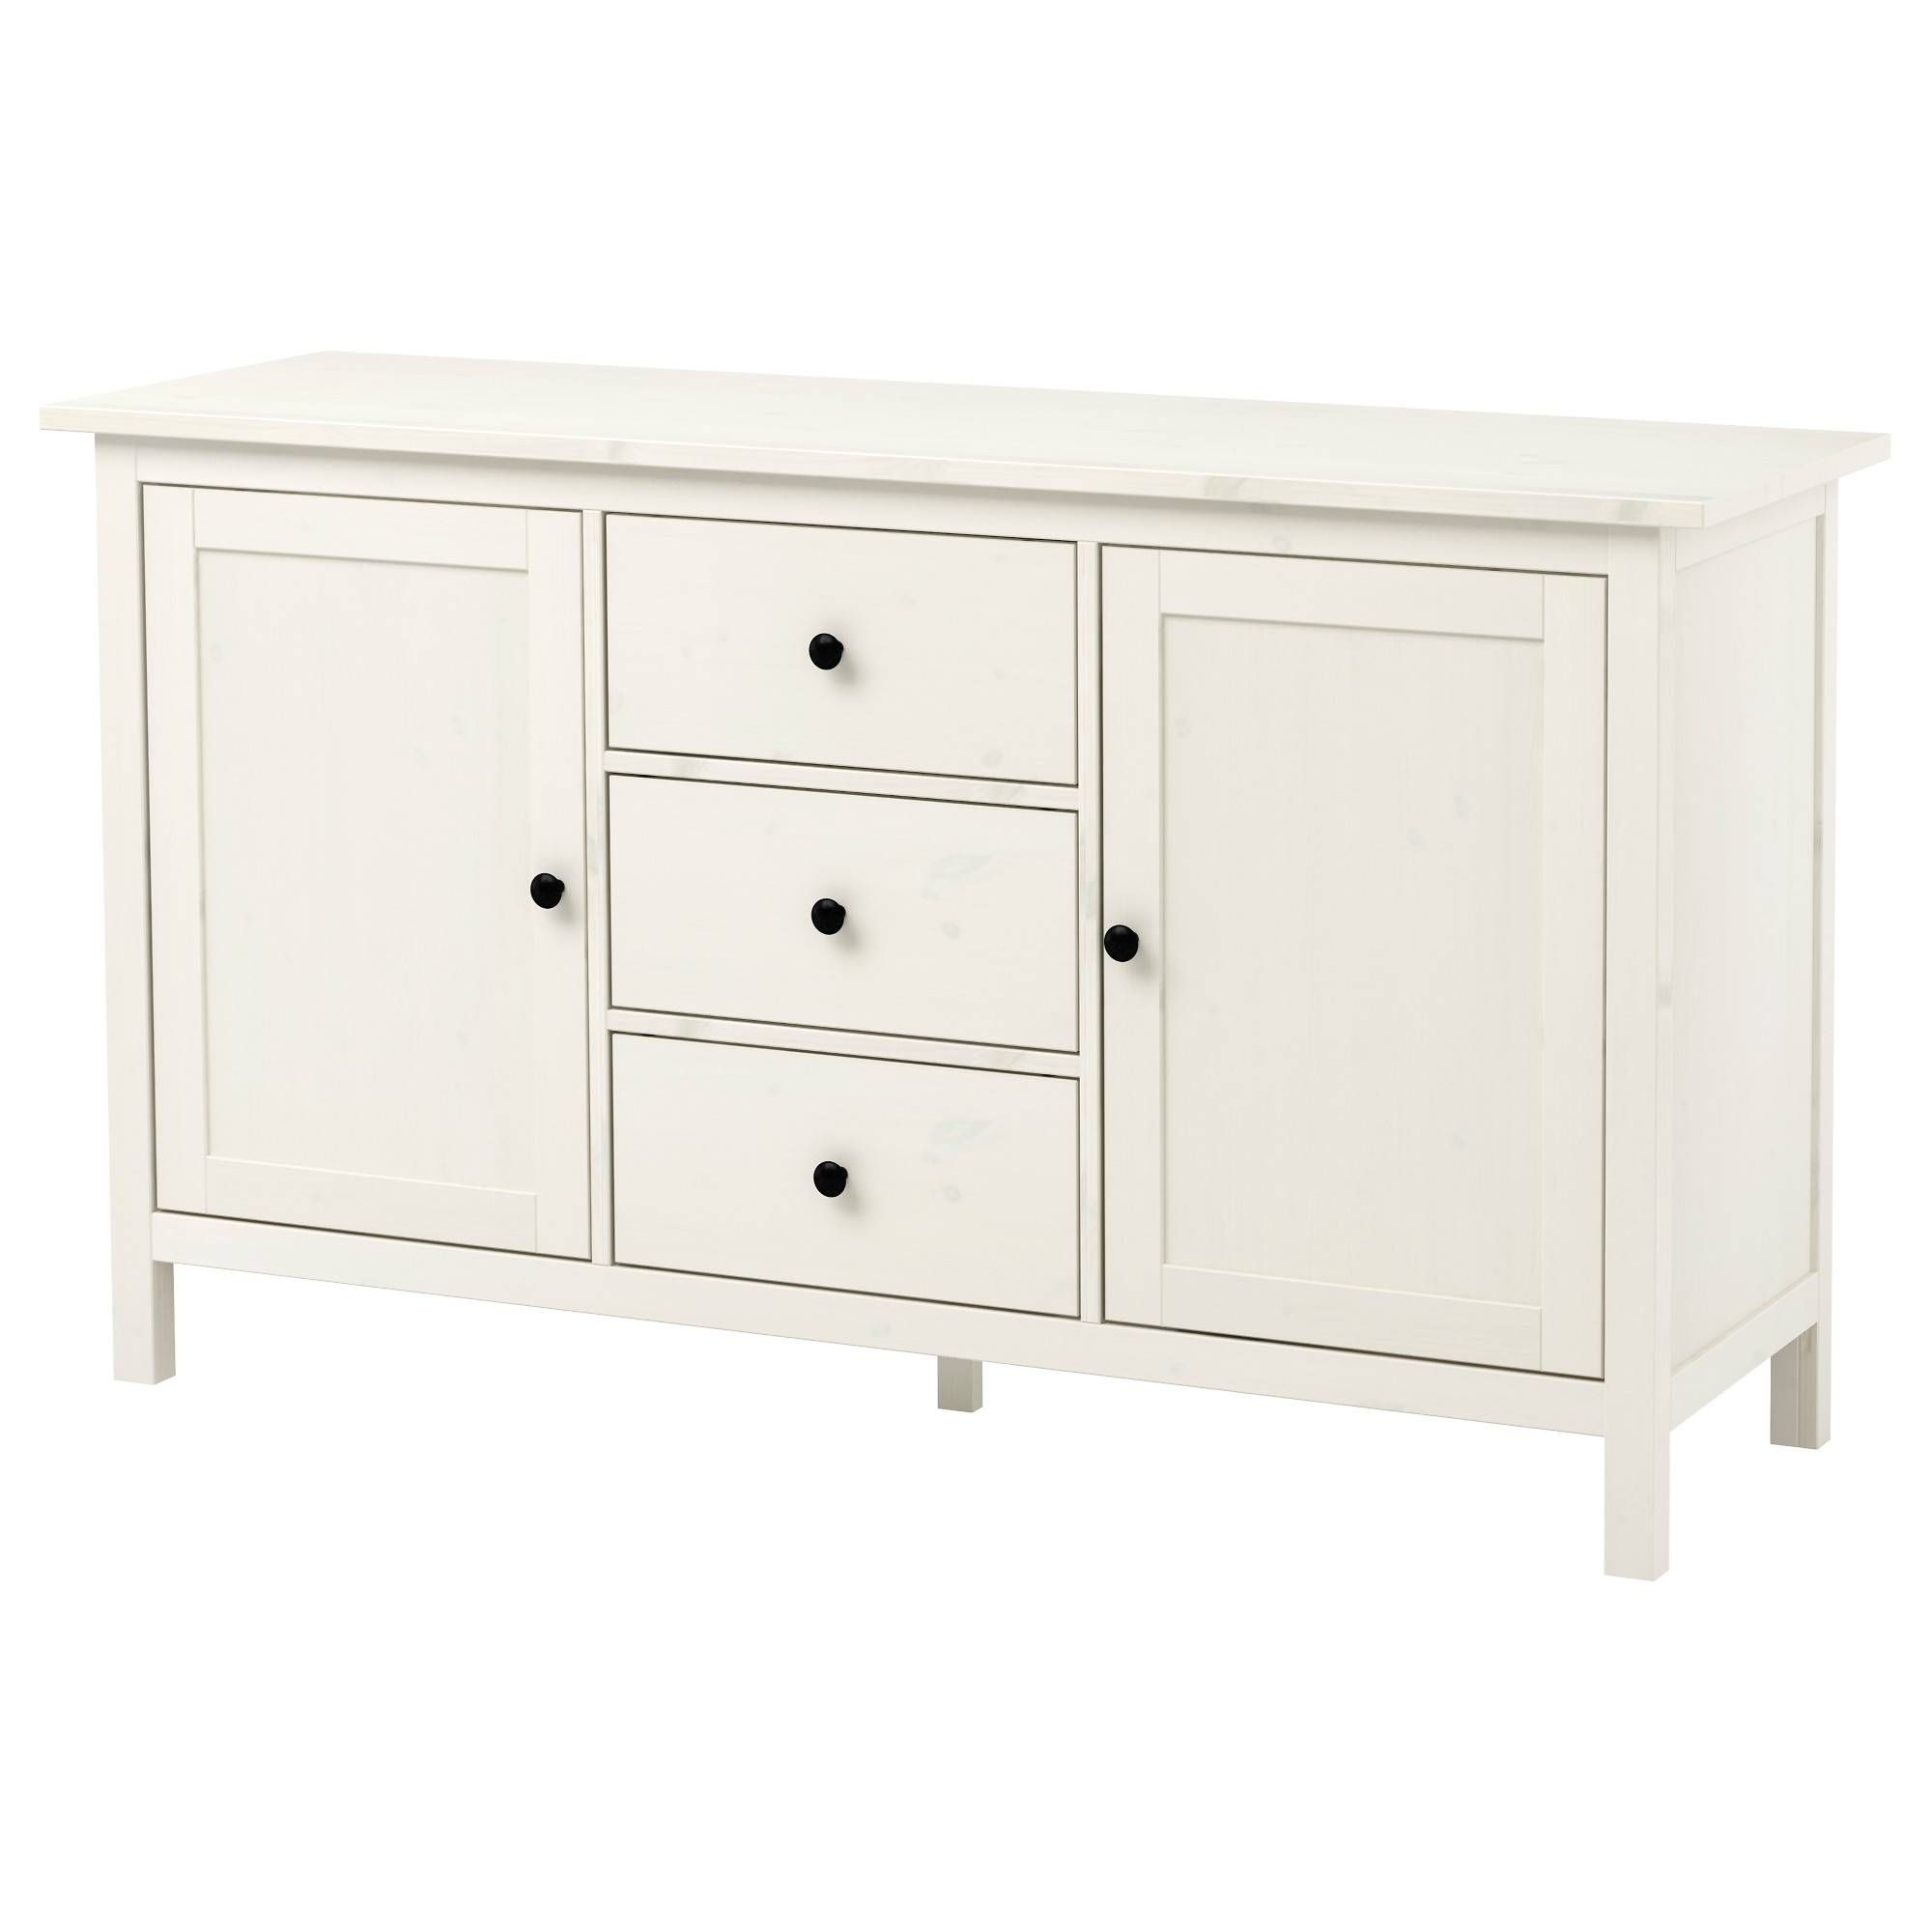 Hemnes Sideboard – White Stain – Ikea With Regard To Kitchen Sideboards (View 14 of 15)